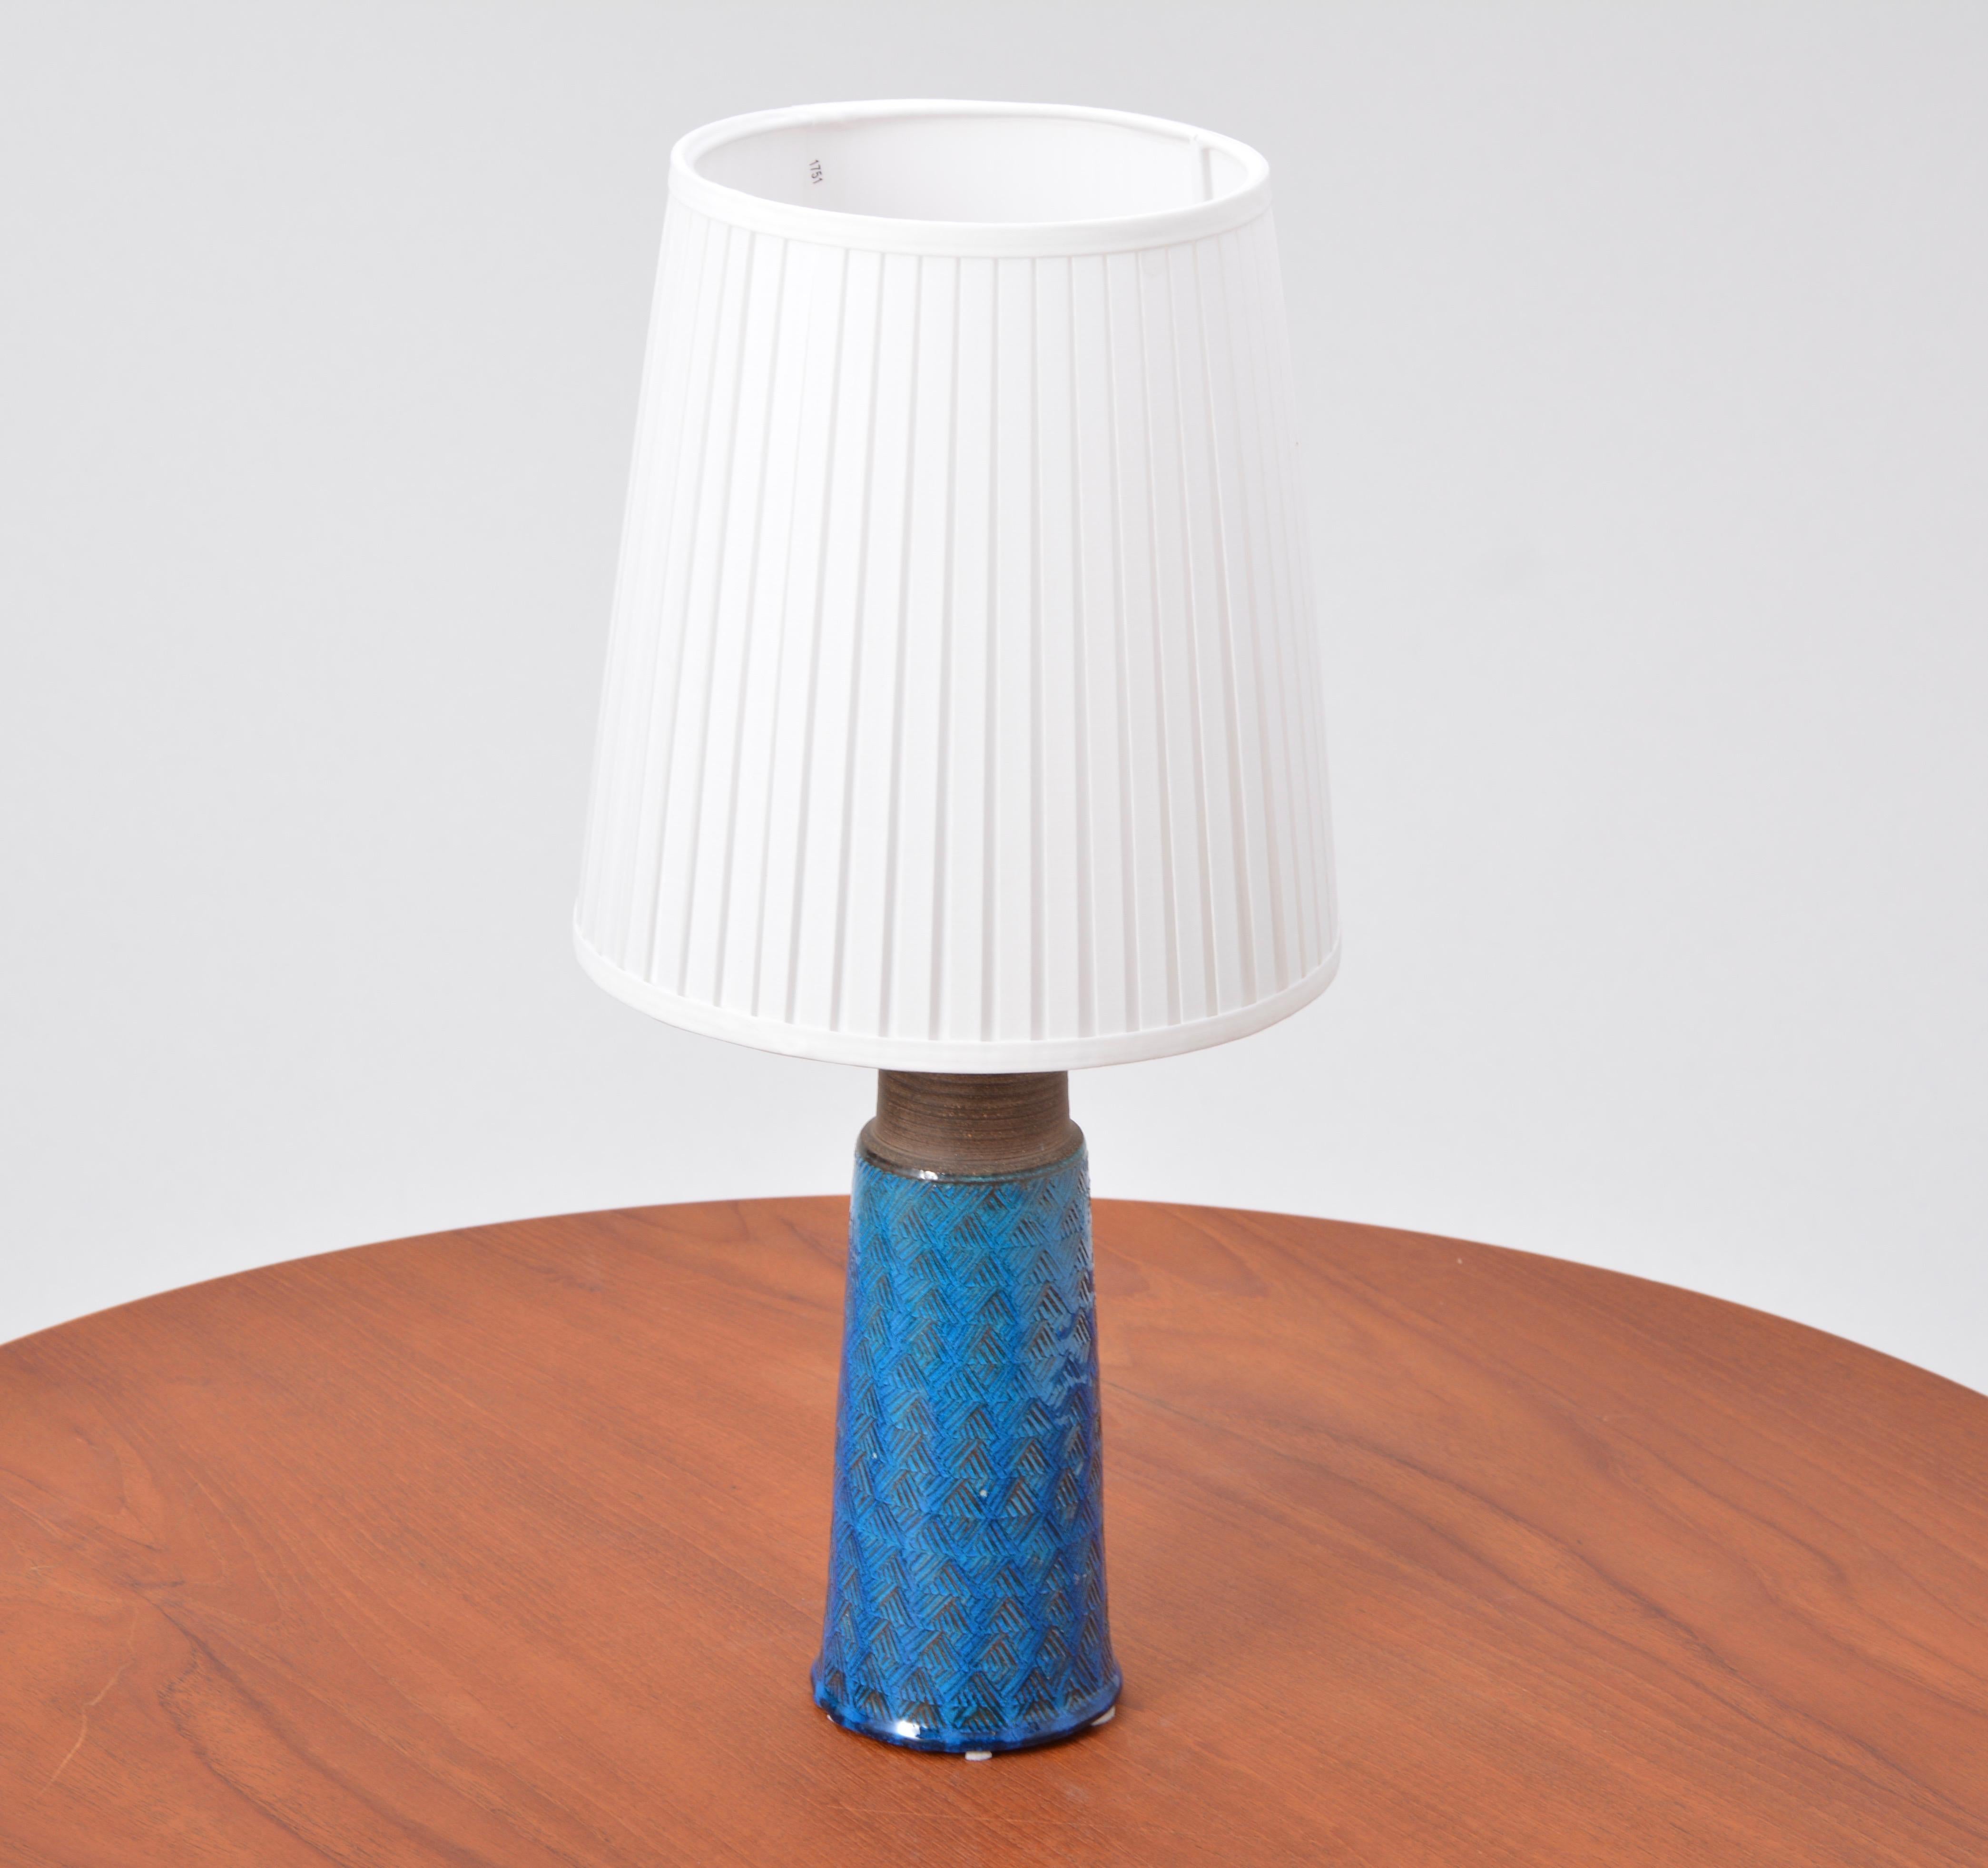 Turquoise Danish Mid-Century Modern Stoneware table lamp by Nils Kähler

This stoneware table lamp was designed by Nils Kähler and made in the 1960s by Herman A Kähler Ceramic (HAK) in Denmark. It has a turqouise colored glaze covering. The top is